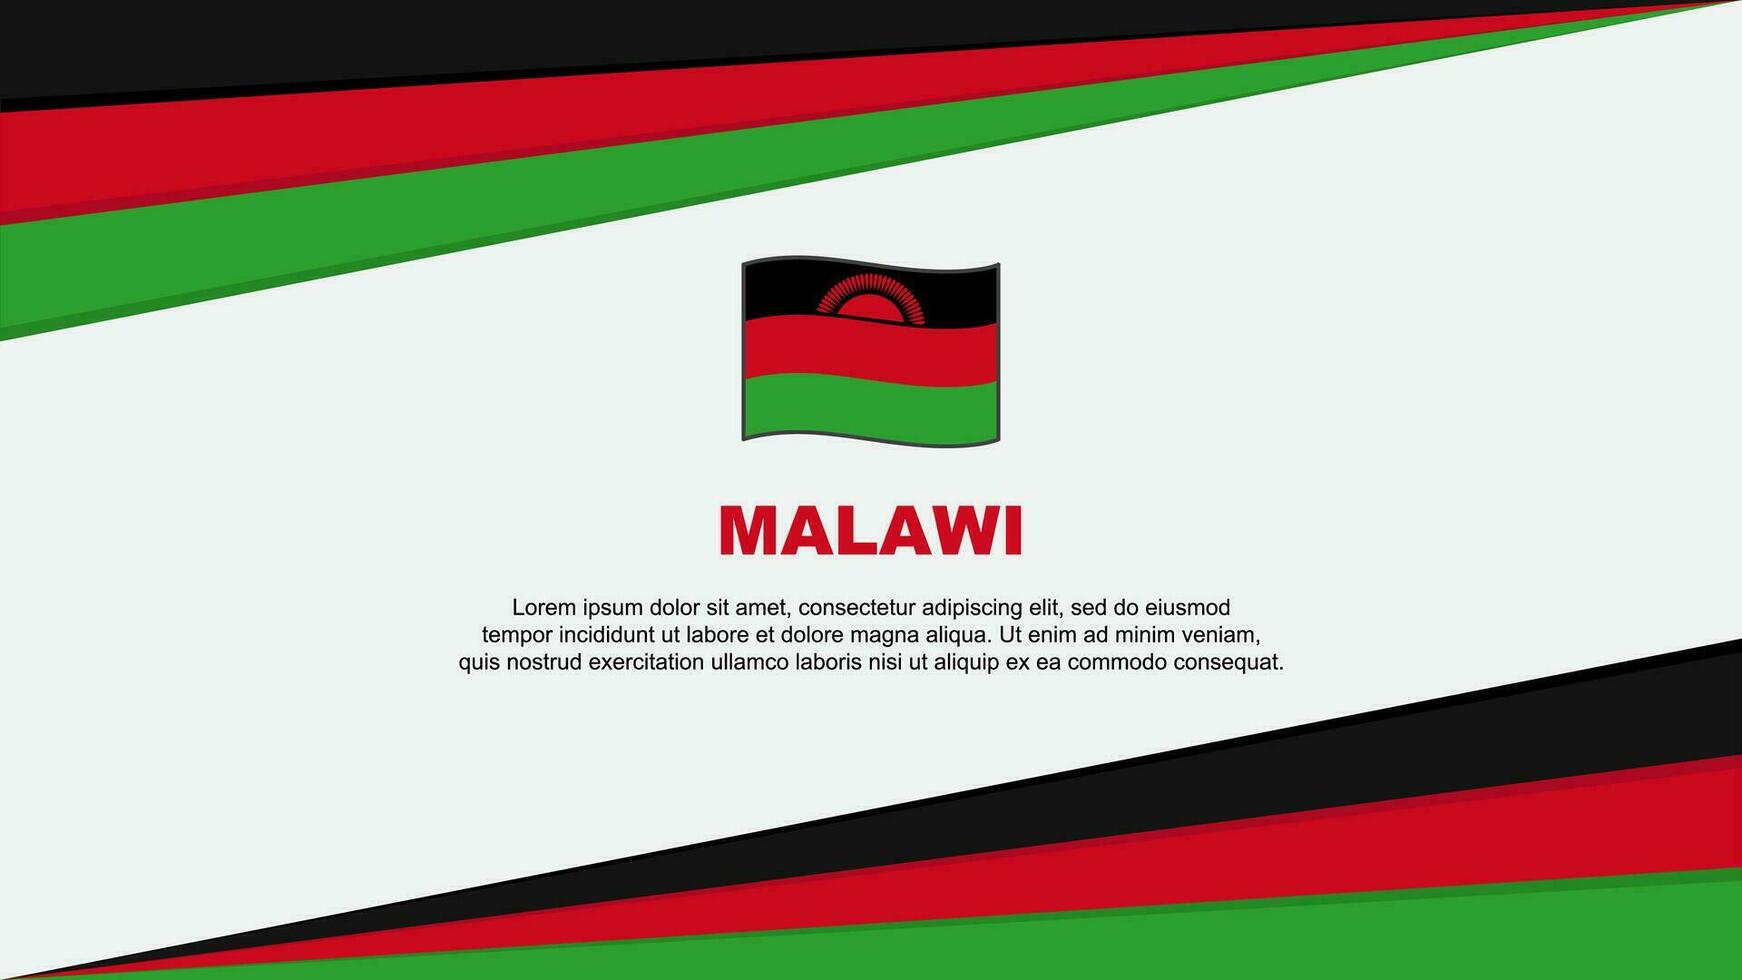 Malawi Flag Abstract Background Design Template. Malawi Independence Day Banner Cartoon Vector Illustration. Malawi Design